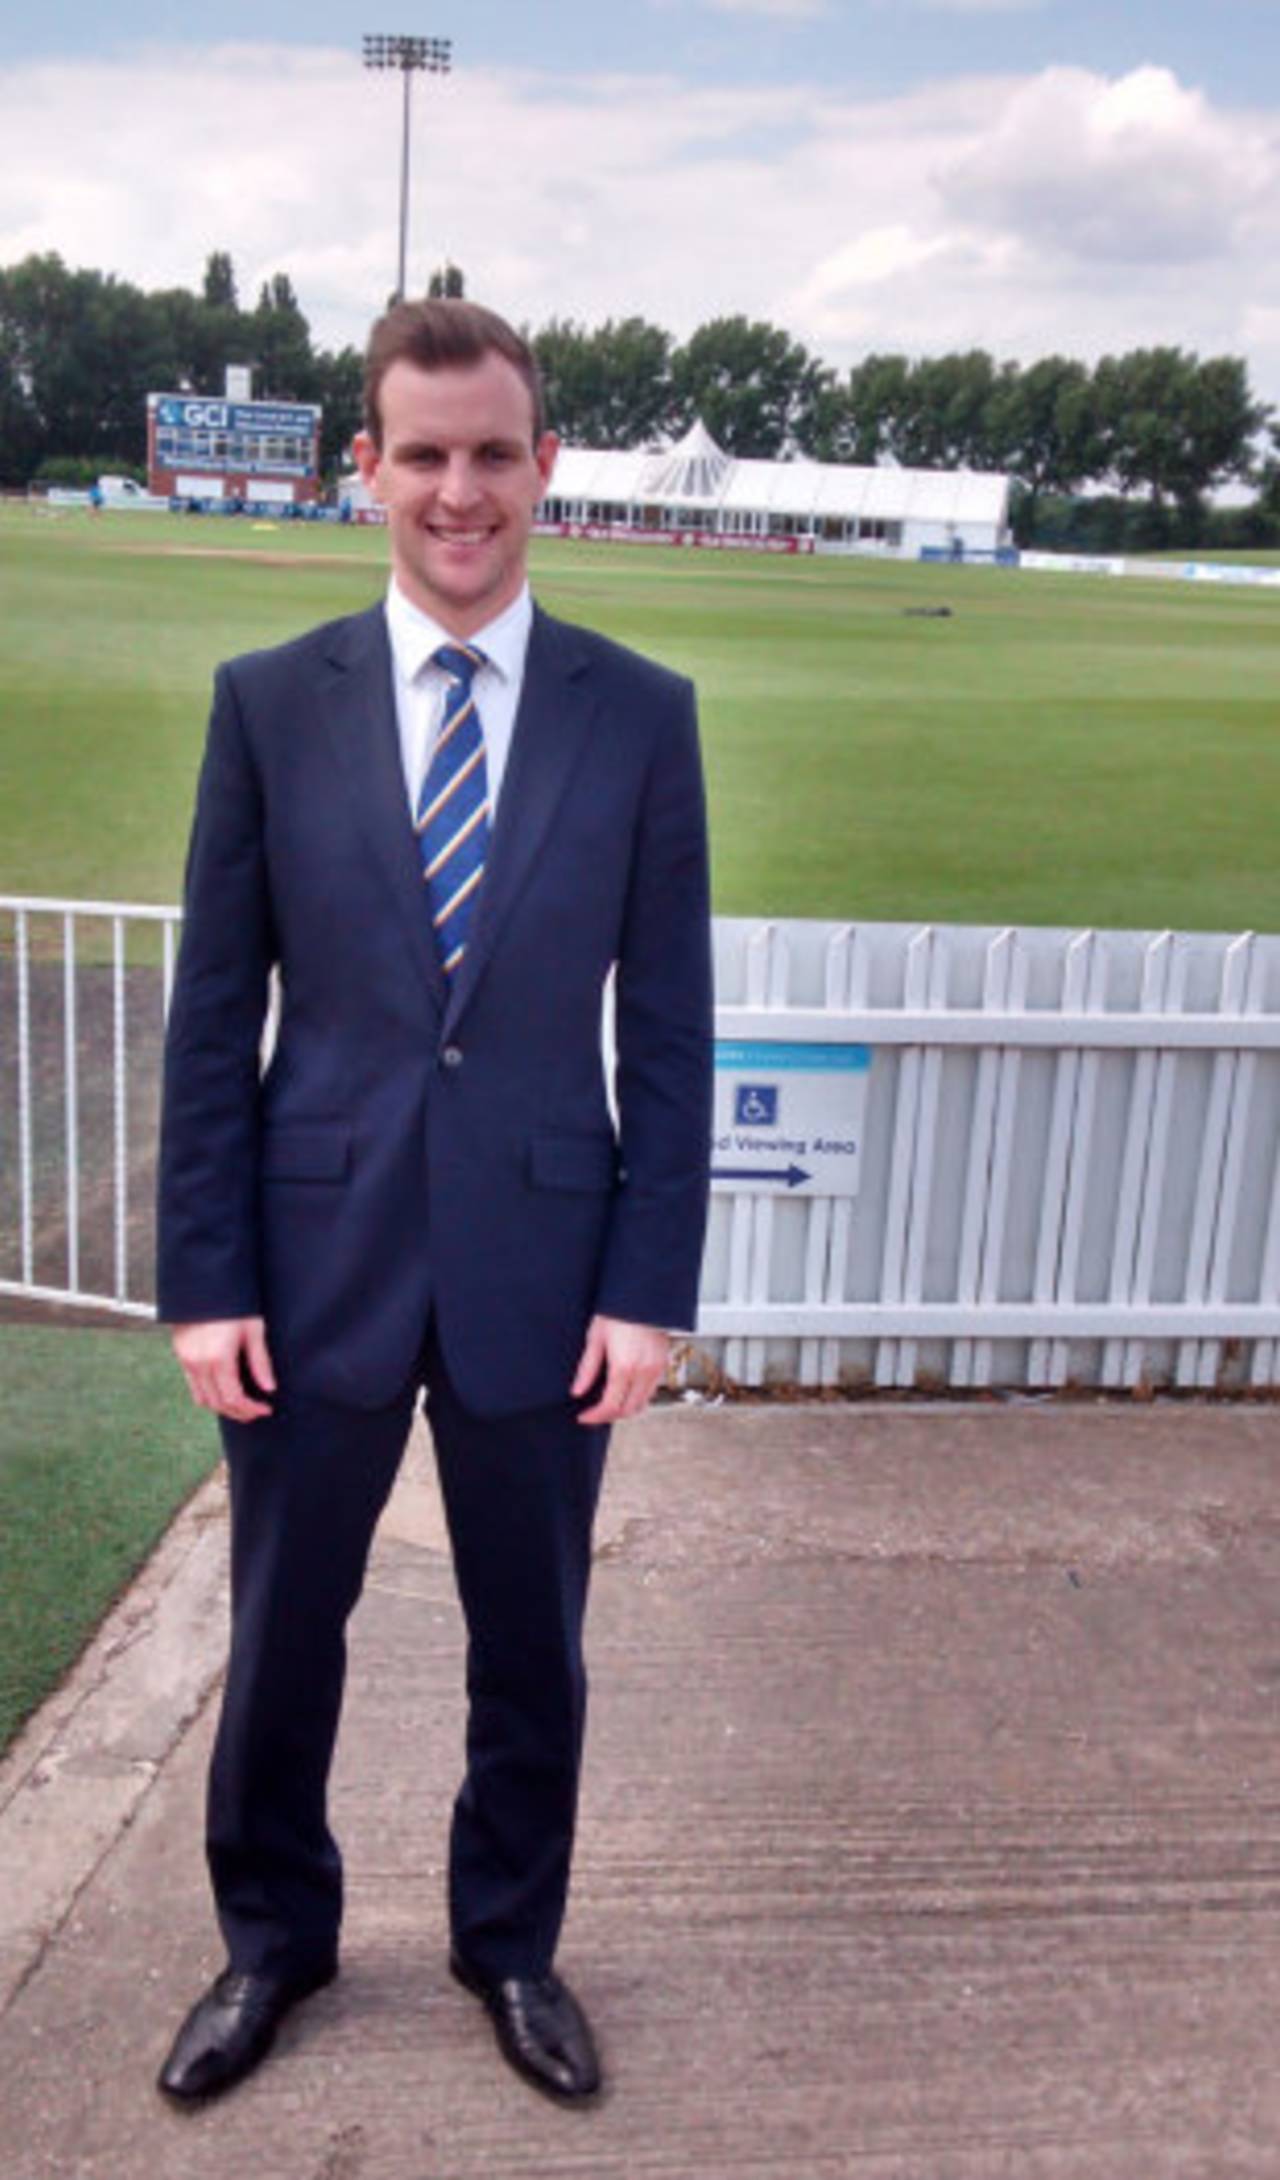 Tom Poynton is involved in promoting the India tour game, County Ground, Derby, June 30, 2014